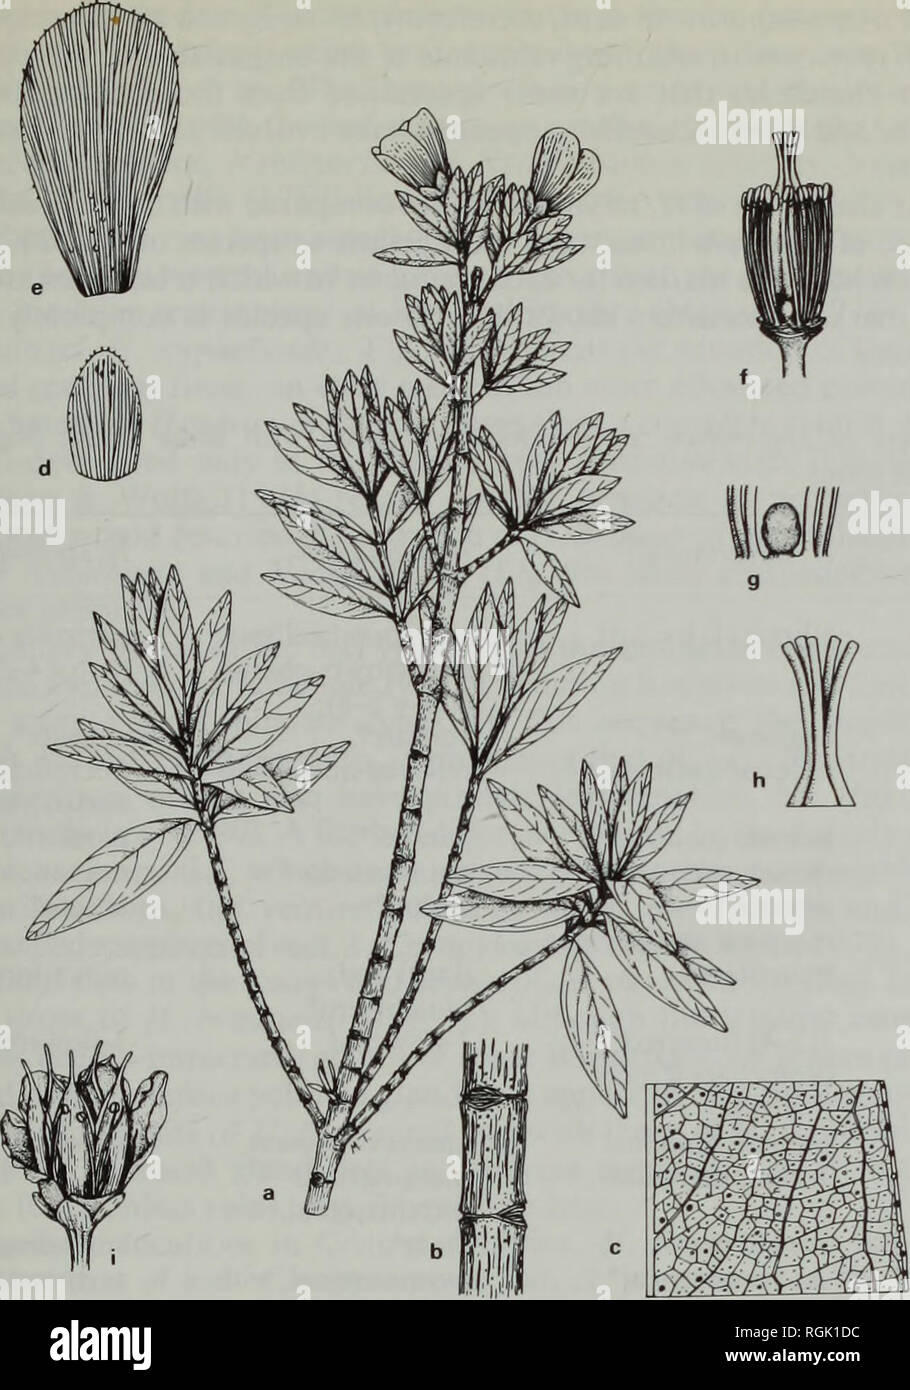 . Bulletin of the British Museum (Natural History) Botany. STUDIES IN THE GENUS HYPERICUMS. (GUTTIFERAE) 59. Fig. 1 Santomasia steyermarkii: (a) habit (x 05); (b) stem nodes and leaf scars (x 1); (c) section of leaf, showing venation and glands (x2-5); (d) sepal (x2-5); (e) petal (x 1-5); (f) flower with perianth removed (x 1); (g) fasciclode and adjacent stamens (x 2); (h) styles (x 2); (i) flower with dehiscent capsule (one petal cut) (x 1) (a-c, Maluda 2894; d-i, Sleyermark 34760). collection (Matuda 2894, from Volcan Tacana West, Mexico) showed their undoubted resemblance to members of Hyp Stock Photo